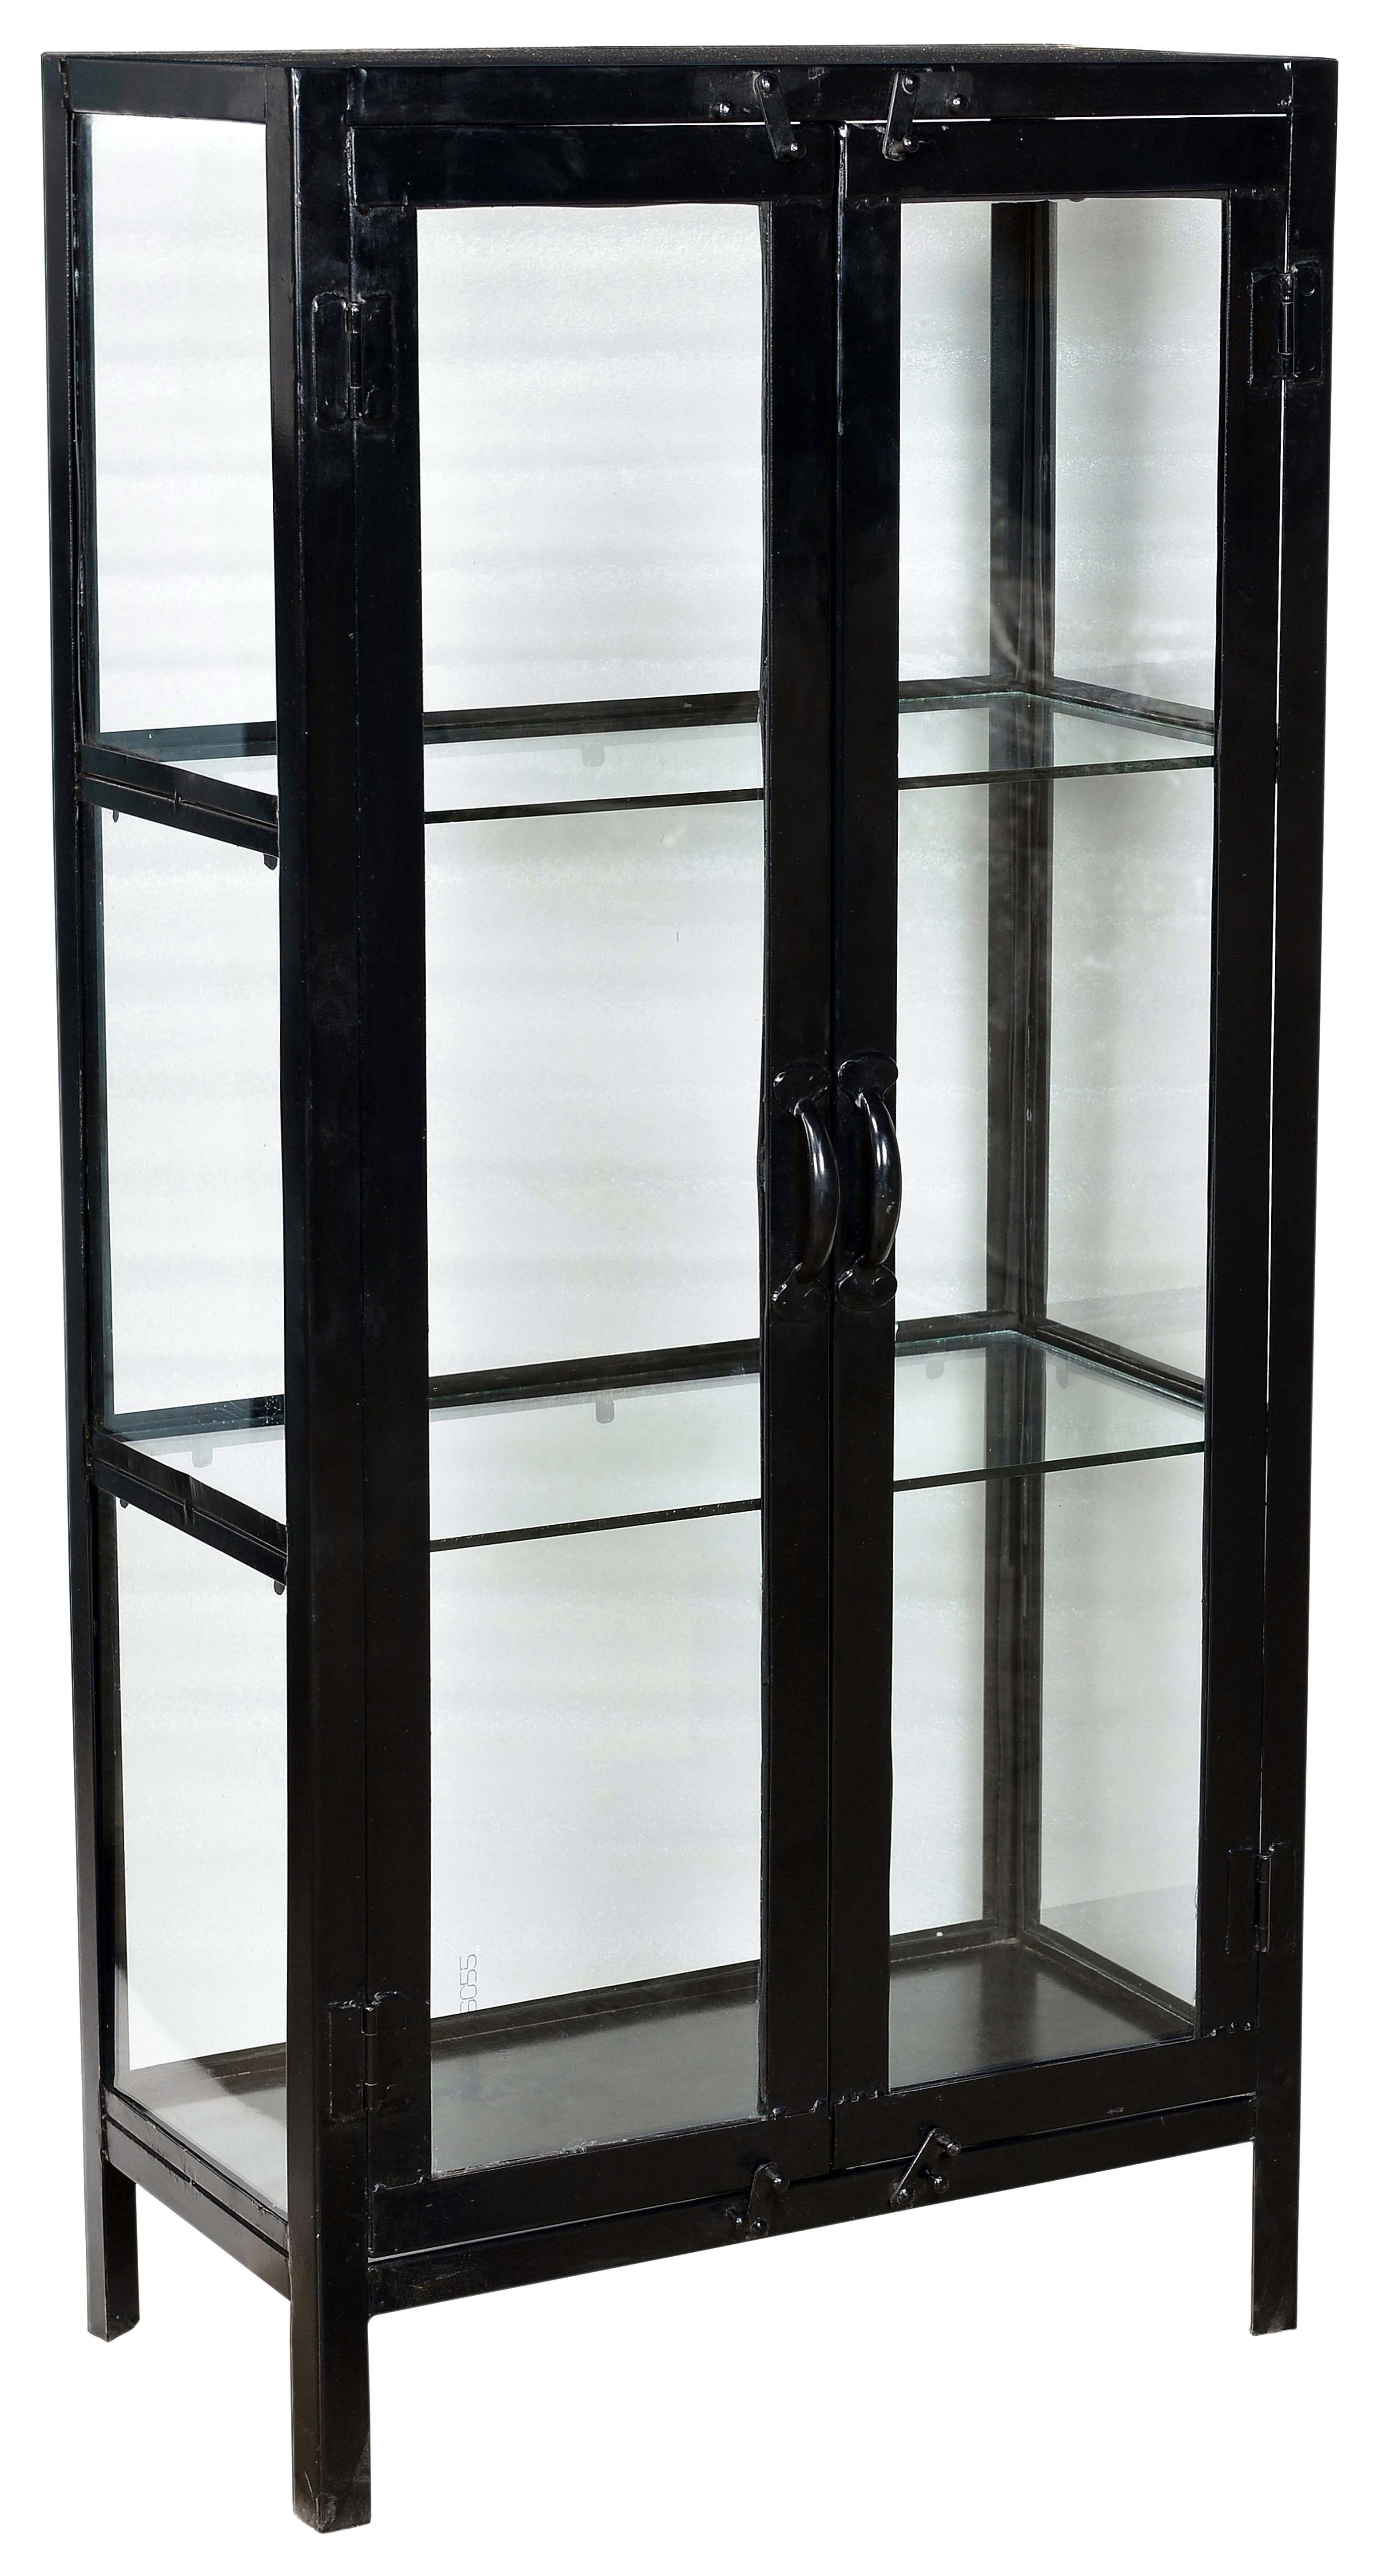 shelves magnificent iron and glass cabinet with doors black shelf brackets floating air display hanging systems plate metal shelving unit small bathroom clear ikea clothes rack